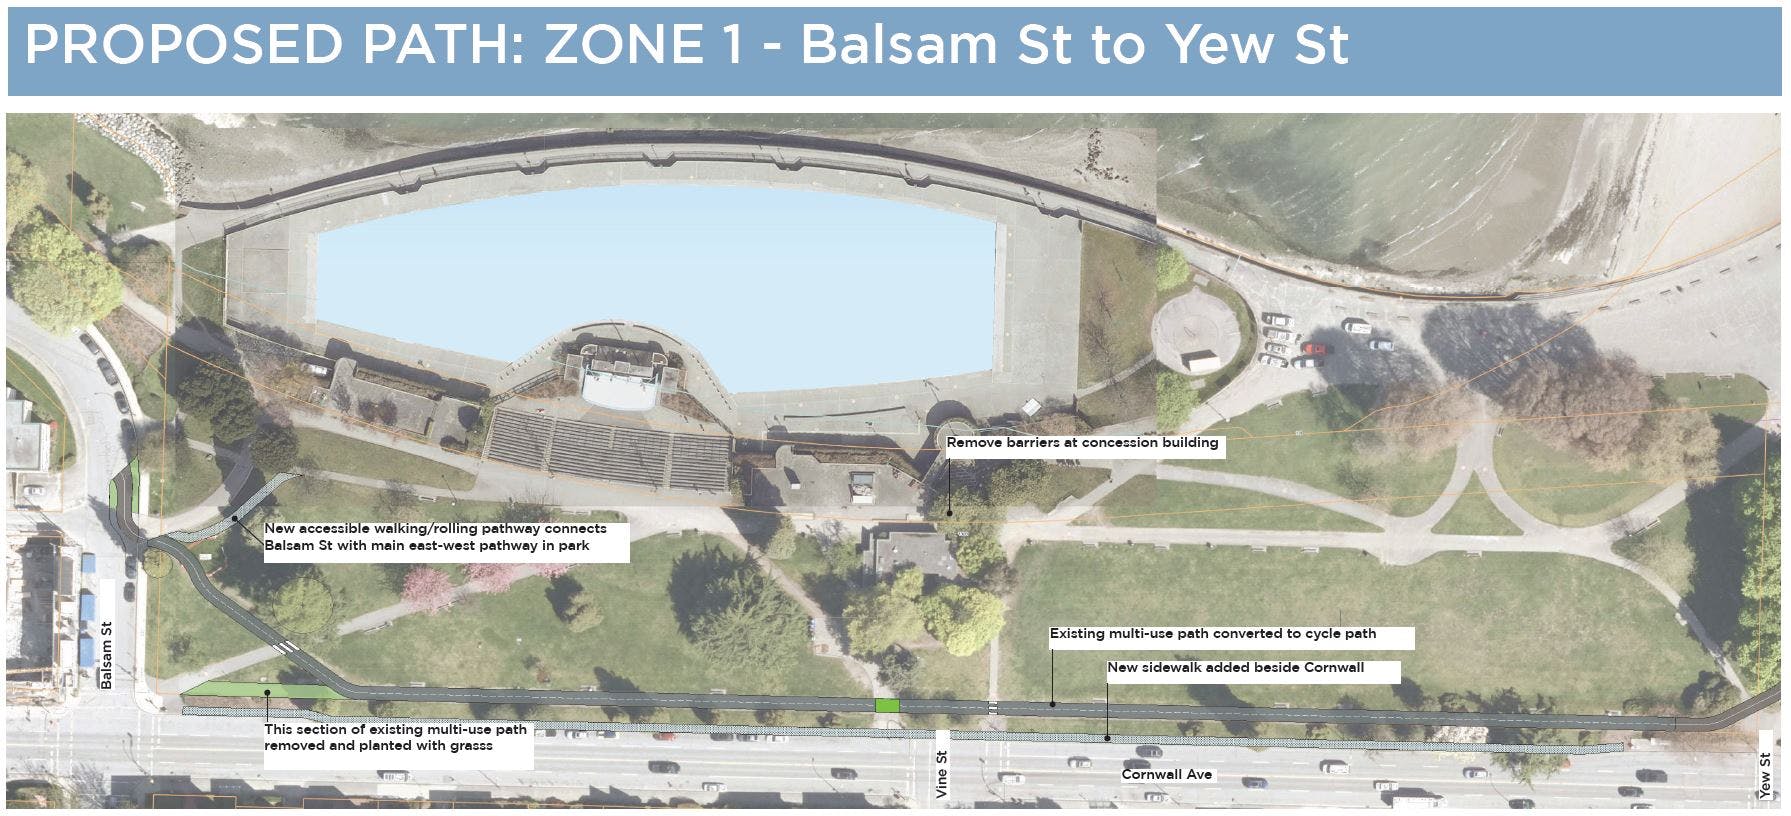 Aerial view map of the west side of Kitsilano Beach Park showing the proposed cycle path route from Balsam Street to Yew Street (Zone 1).